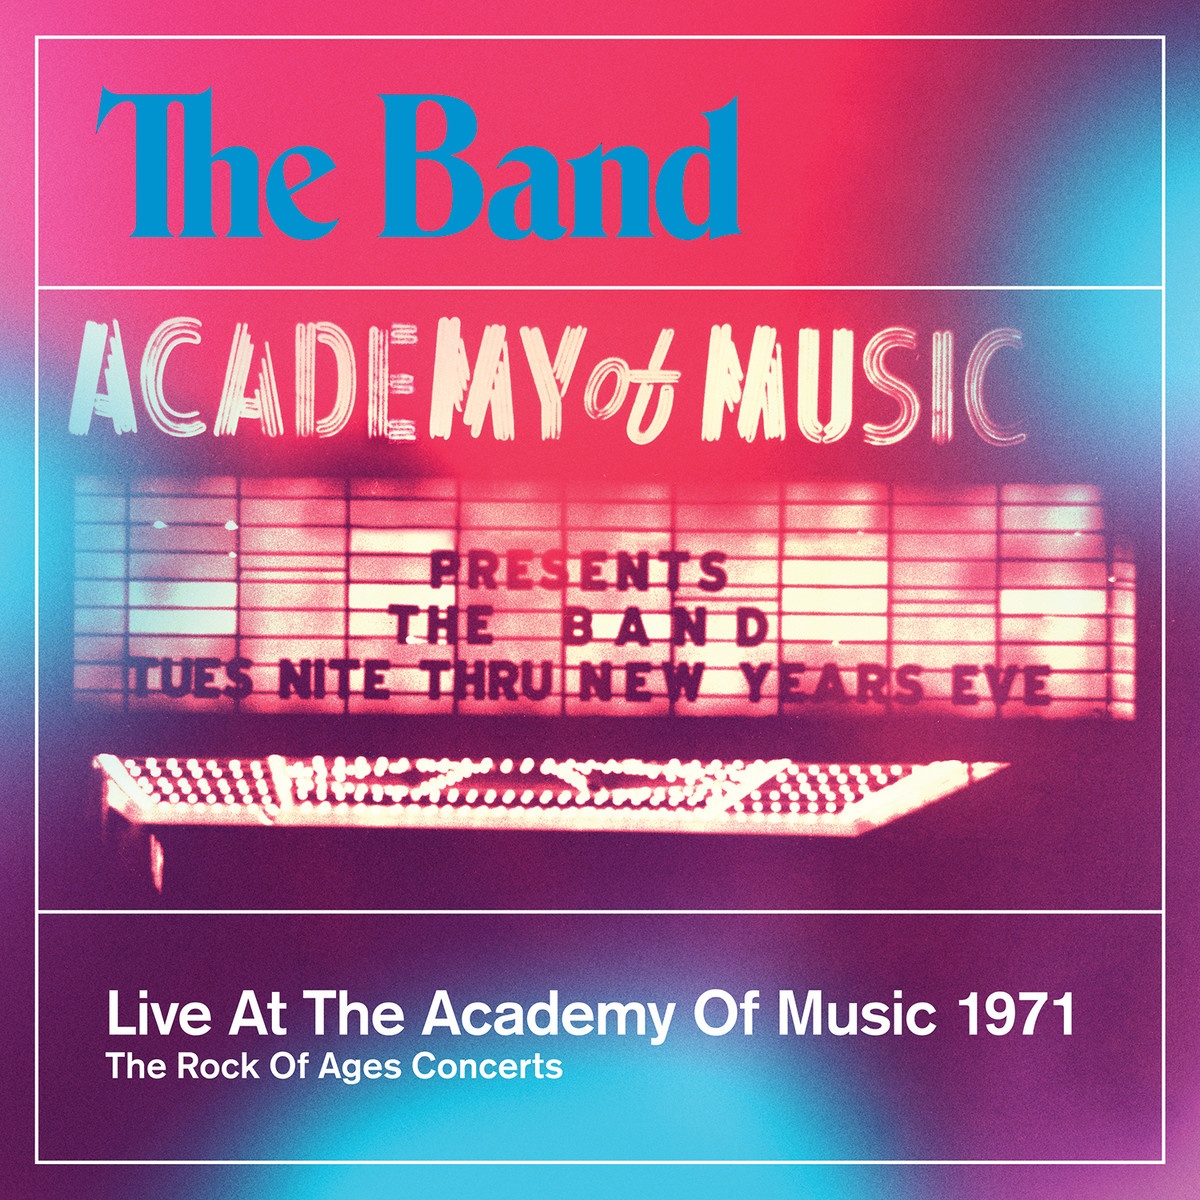 Get Up Jake (Live At The Academy Of Music / 1971 / Soundboard Mix)